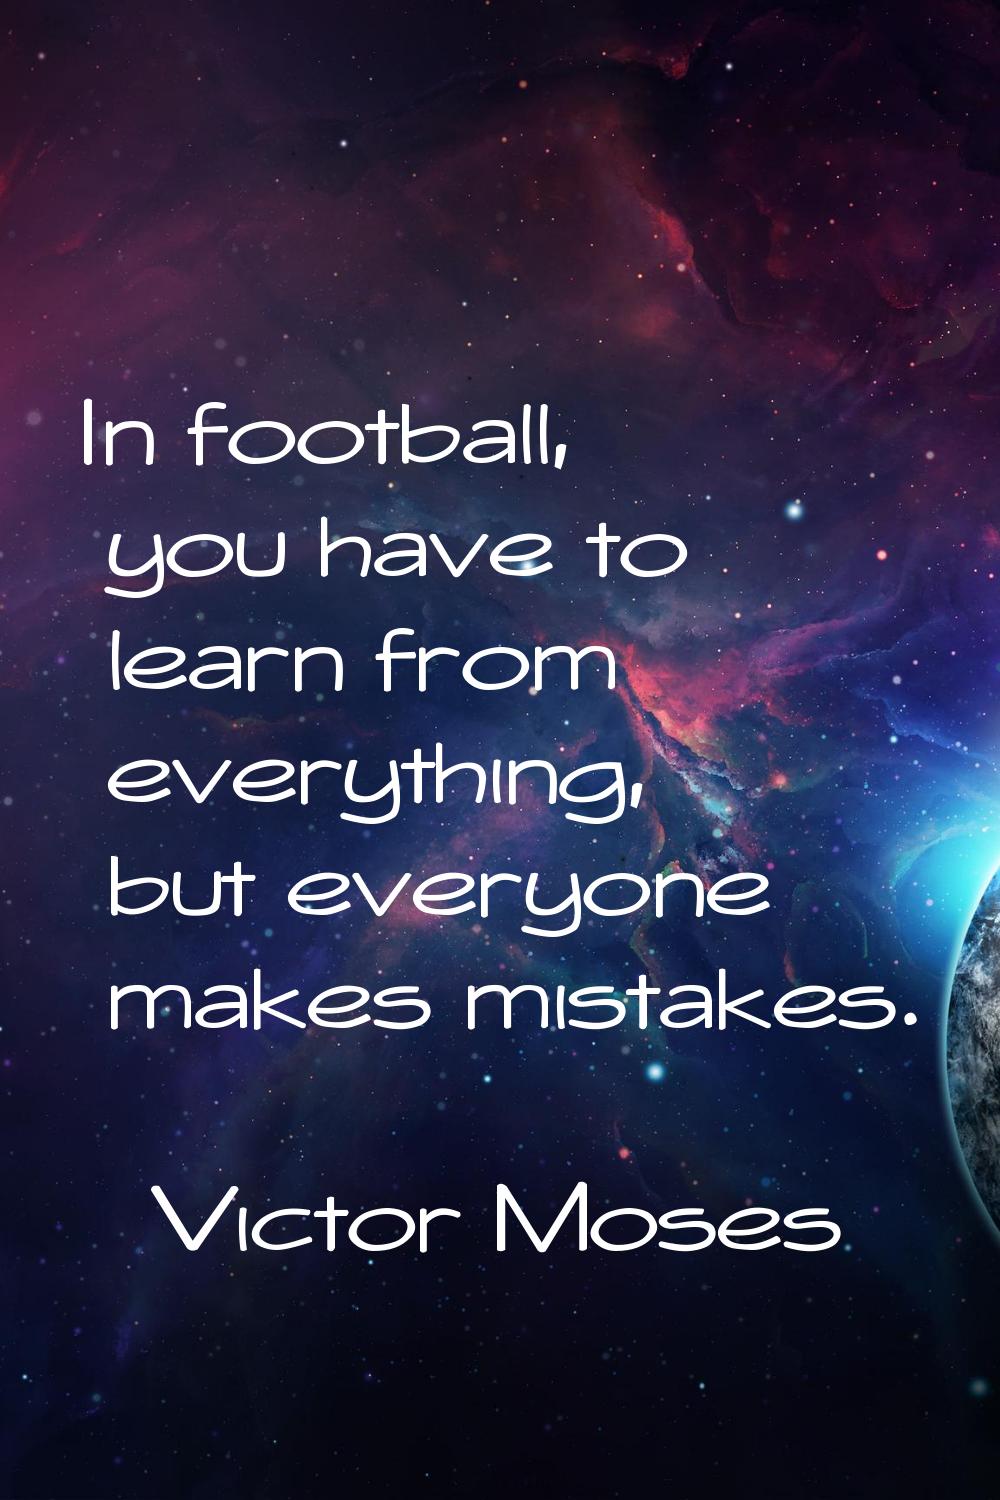 In football, you have to learn from everything, but everyone makes mistakes.